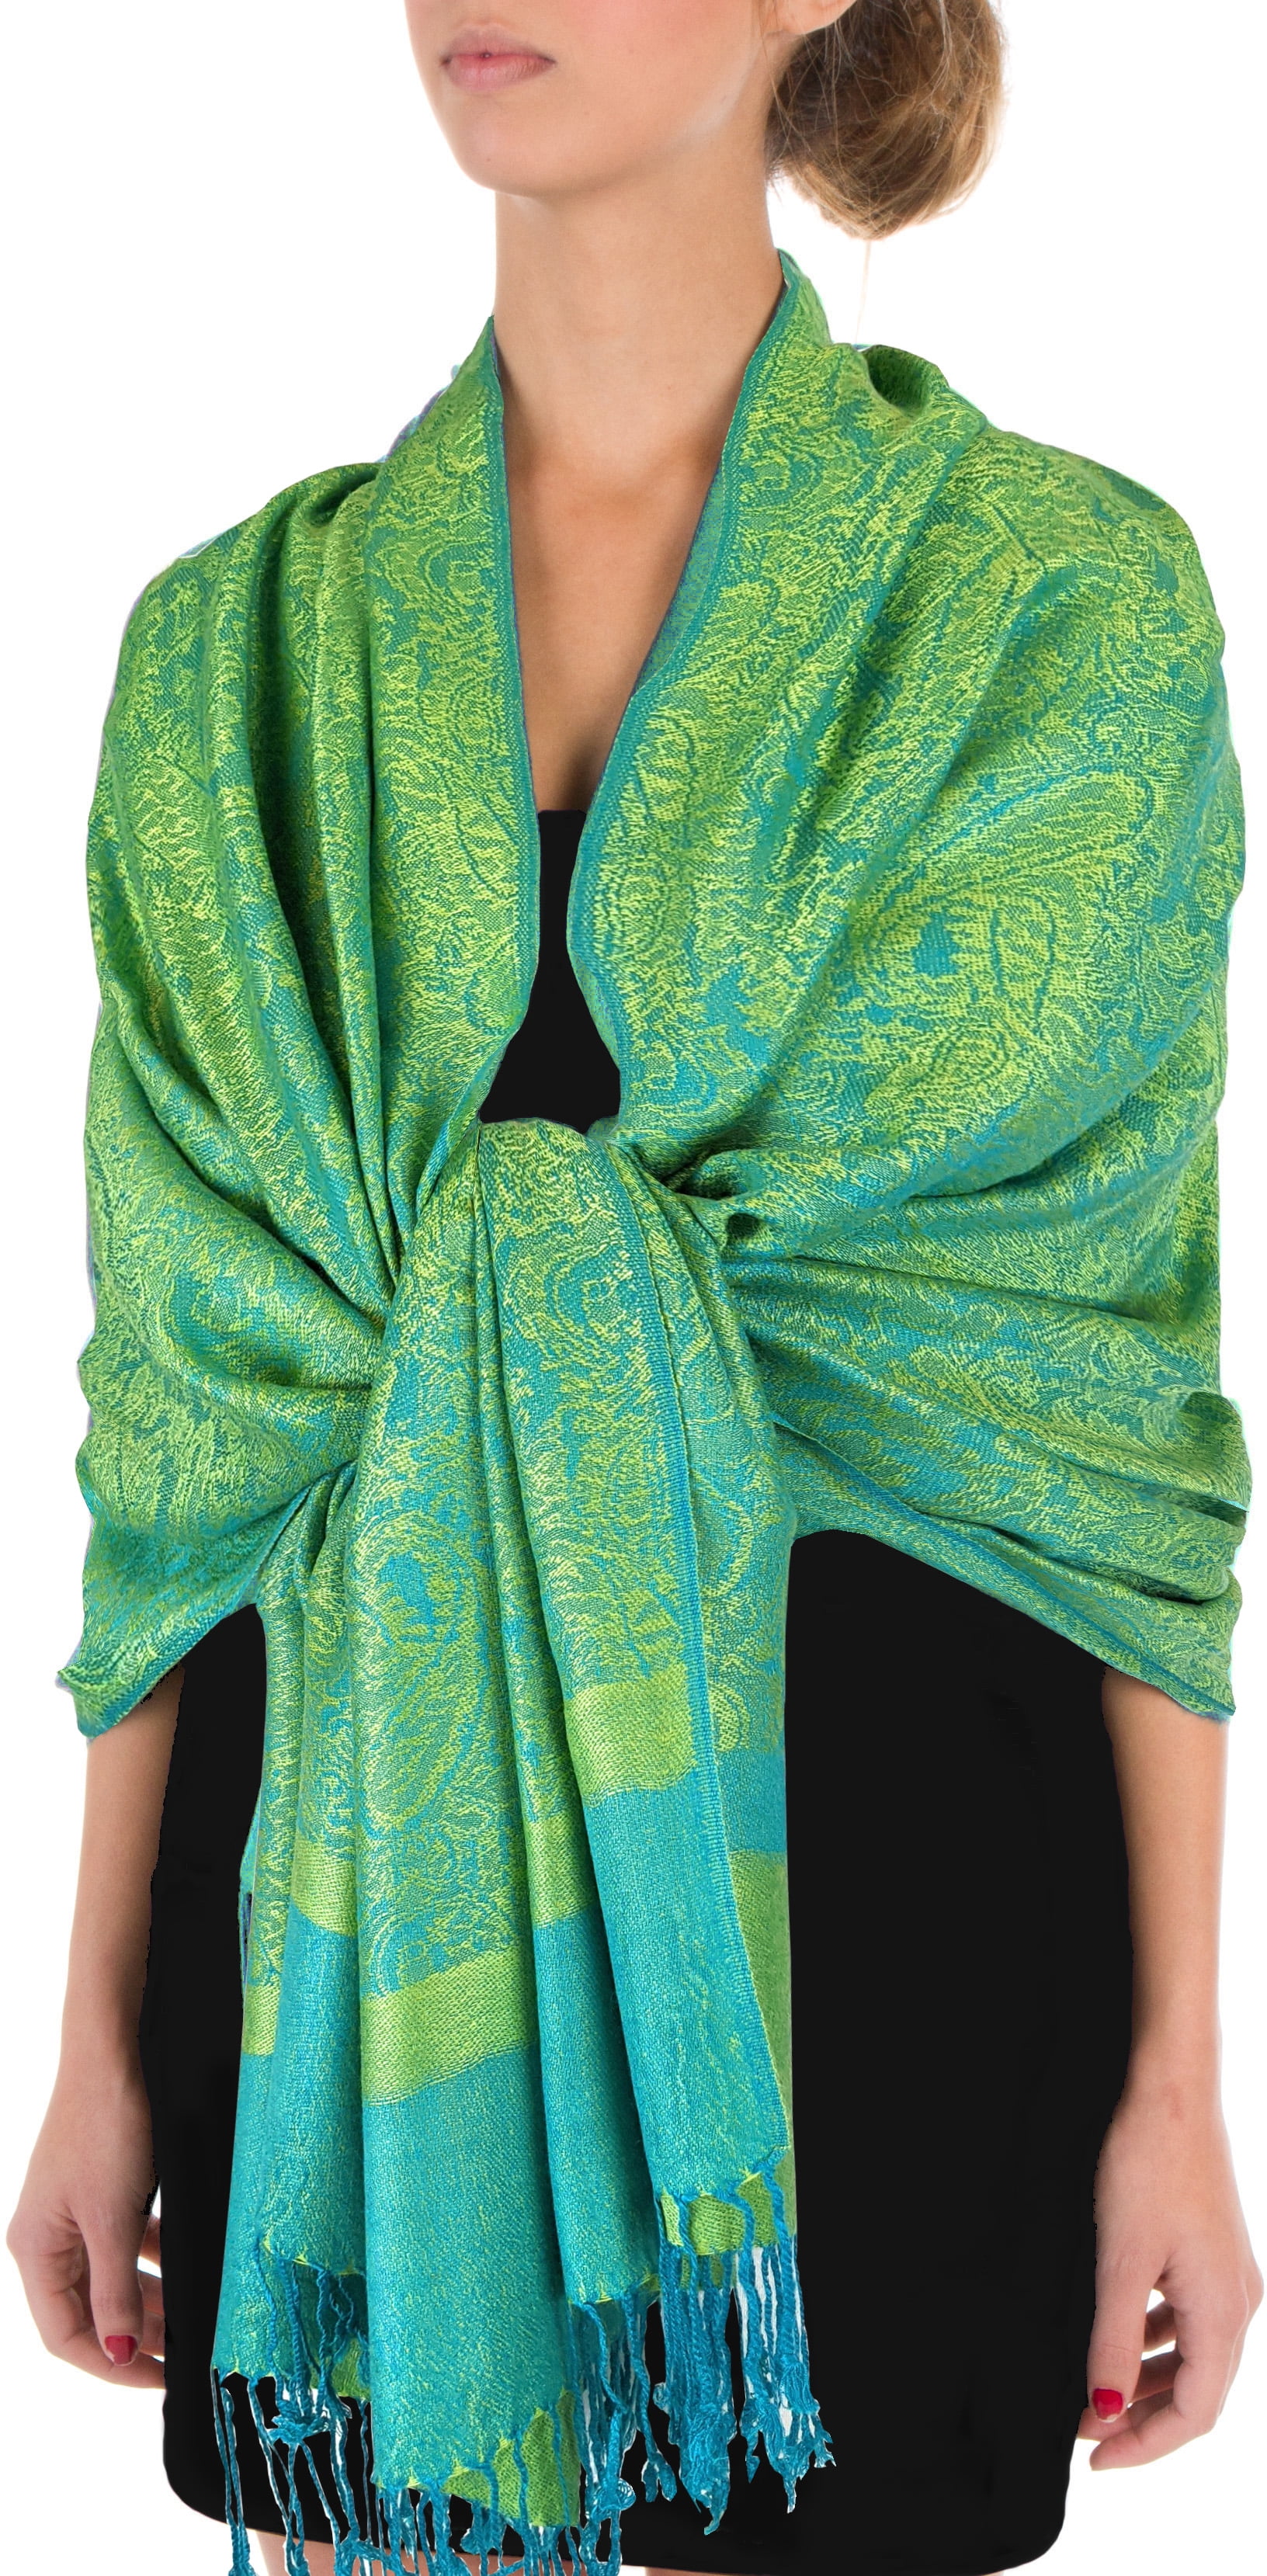 New Solid Paisley Pashmina Silk Cashmere Shawl Scarf Stole Wrap Fruit green 